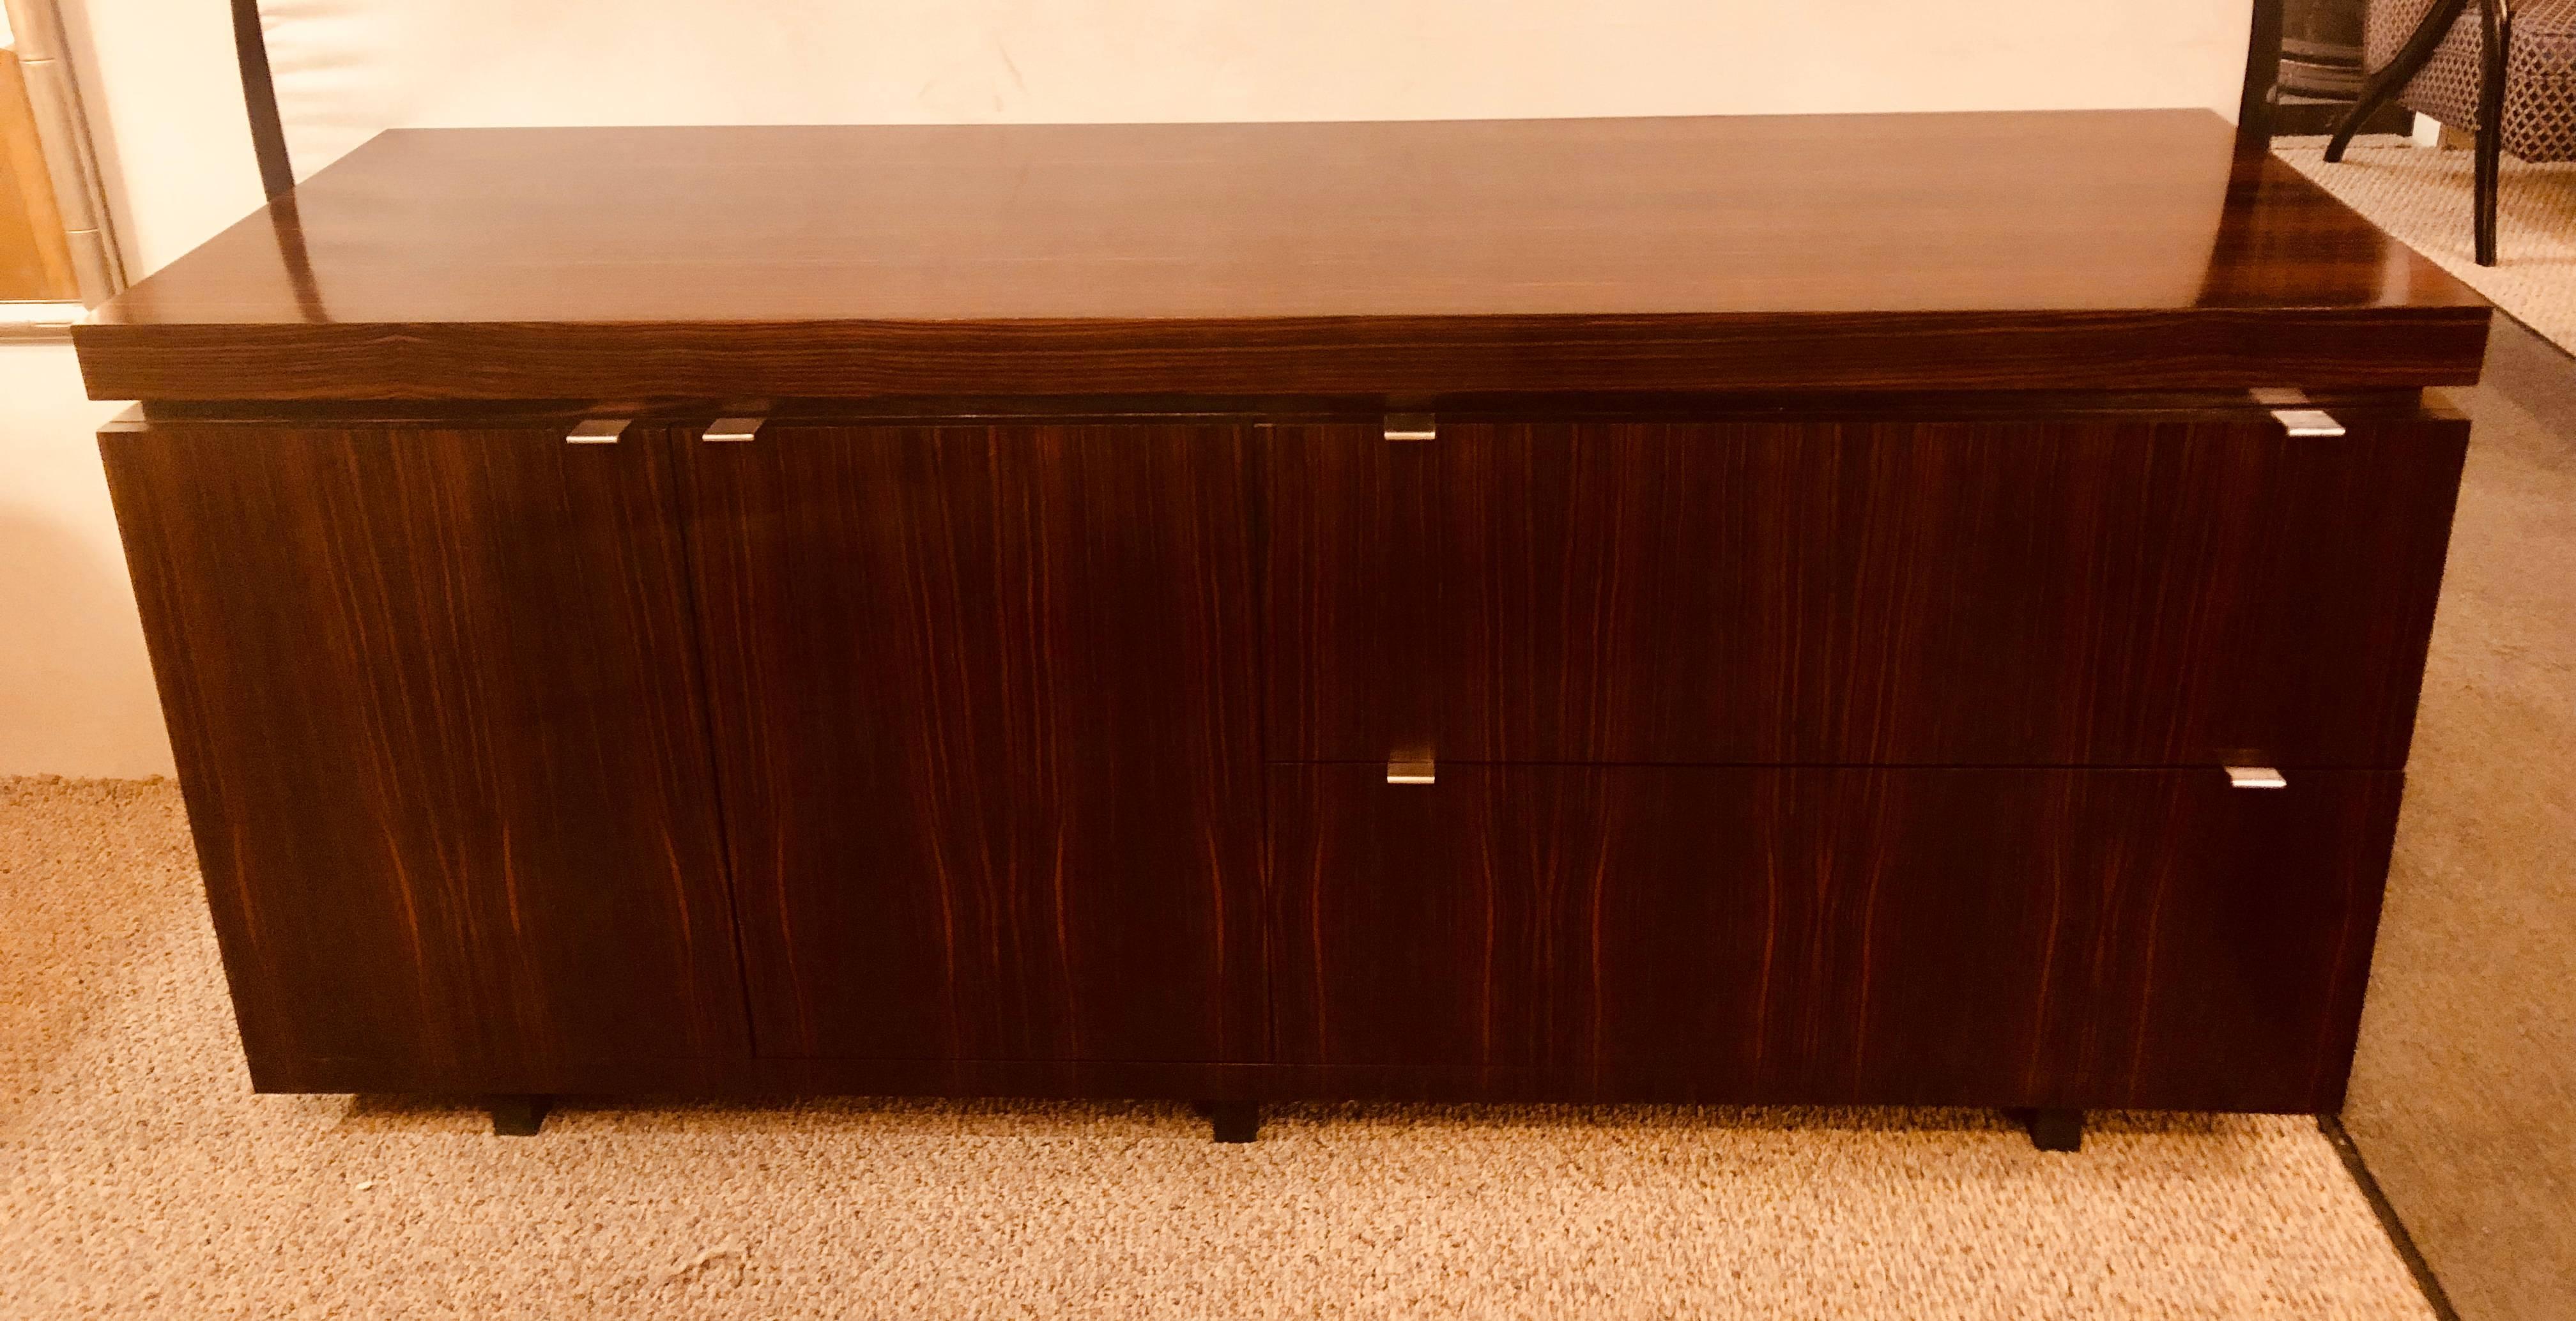 A rosewood Mid-Century Modern floating office sideboard with filing cabinets. This recently fully polished custom quality credenza cabinet appears to be floating on air. Having two doors leading to a shelved interior and two side sliding file